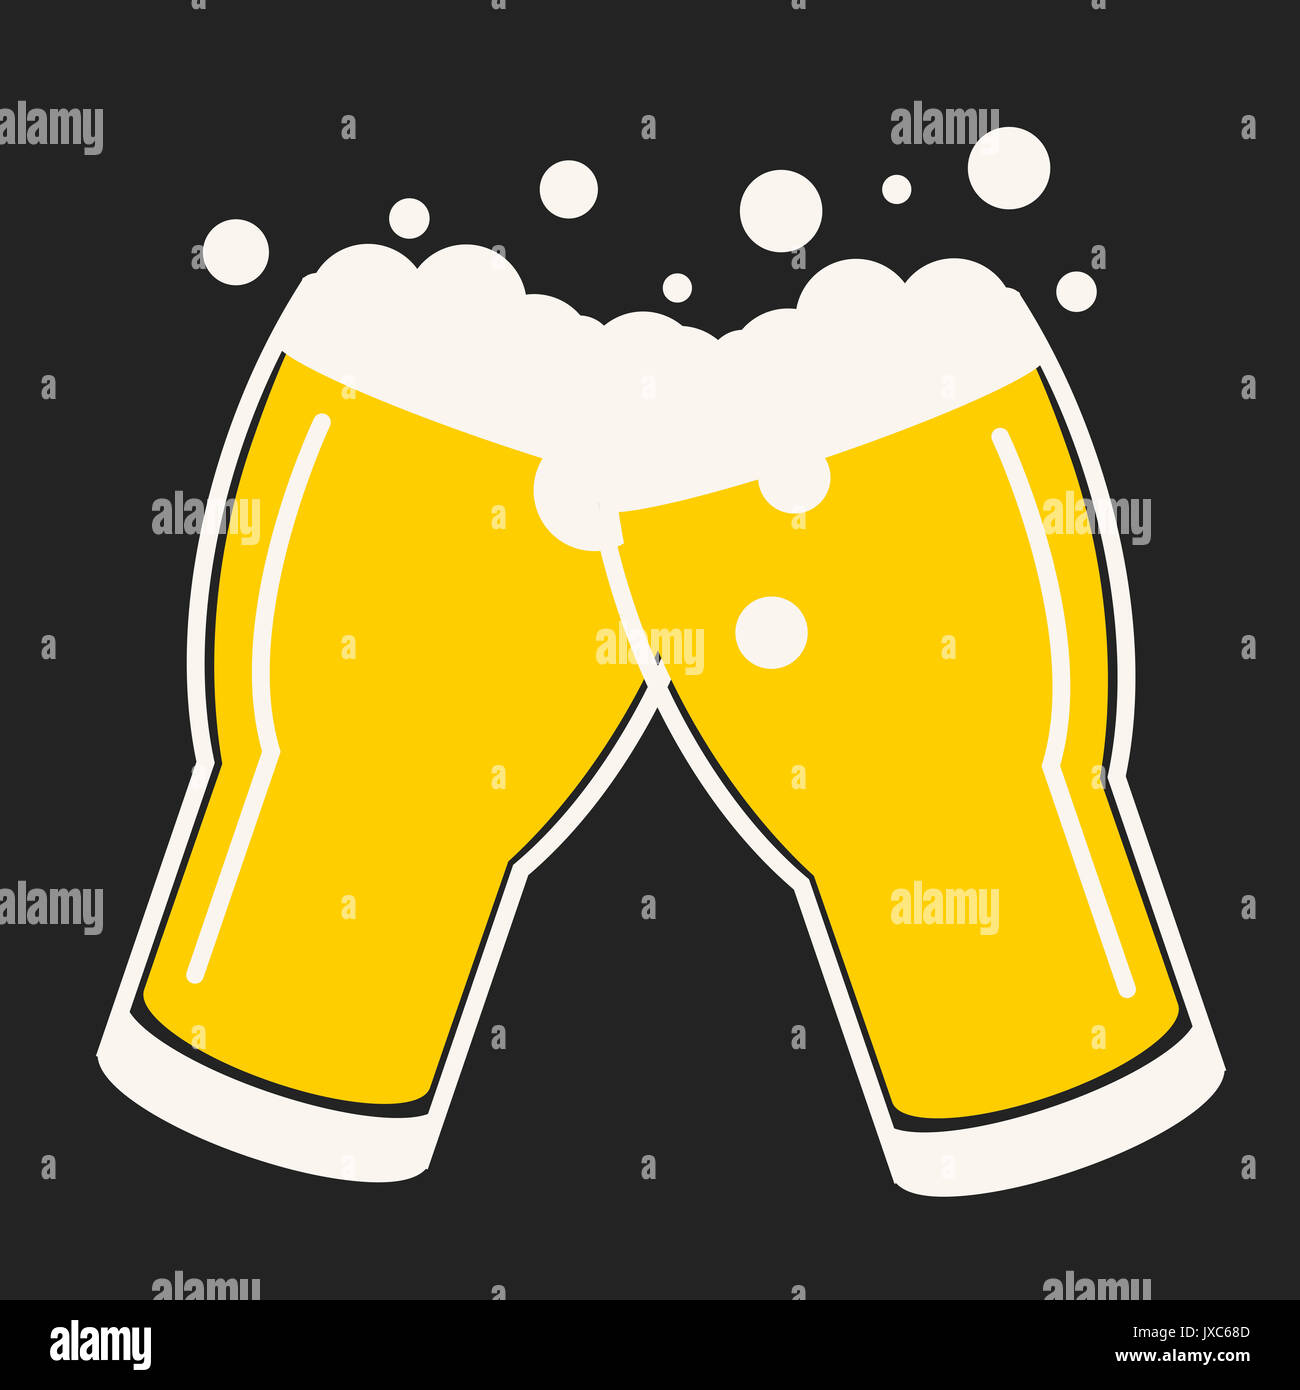 beer glass cartoon vector graphic or illustrations Stock Photo